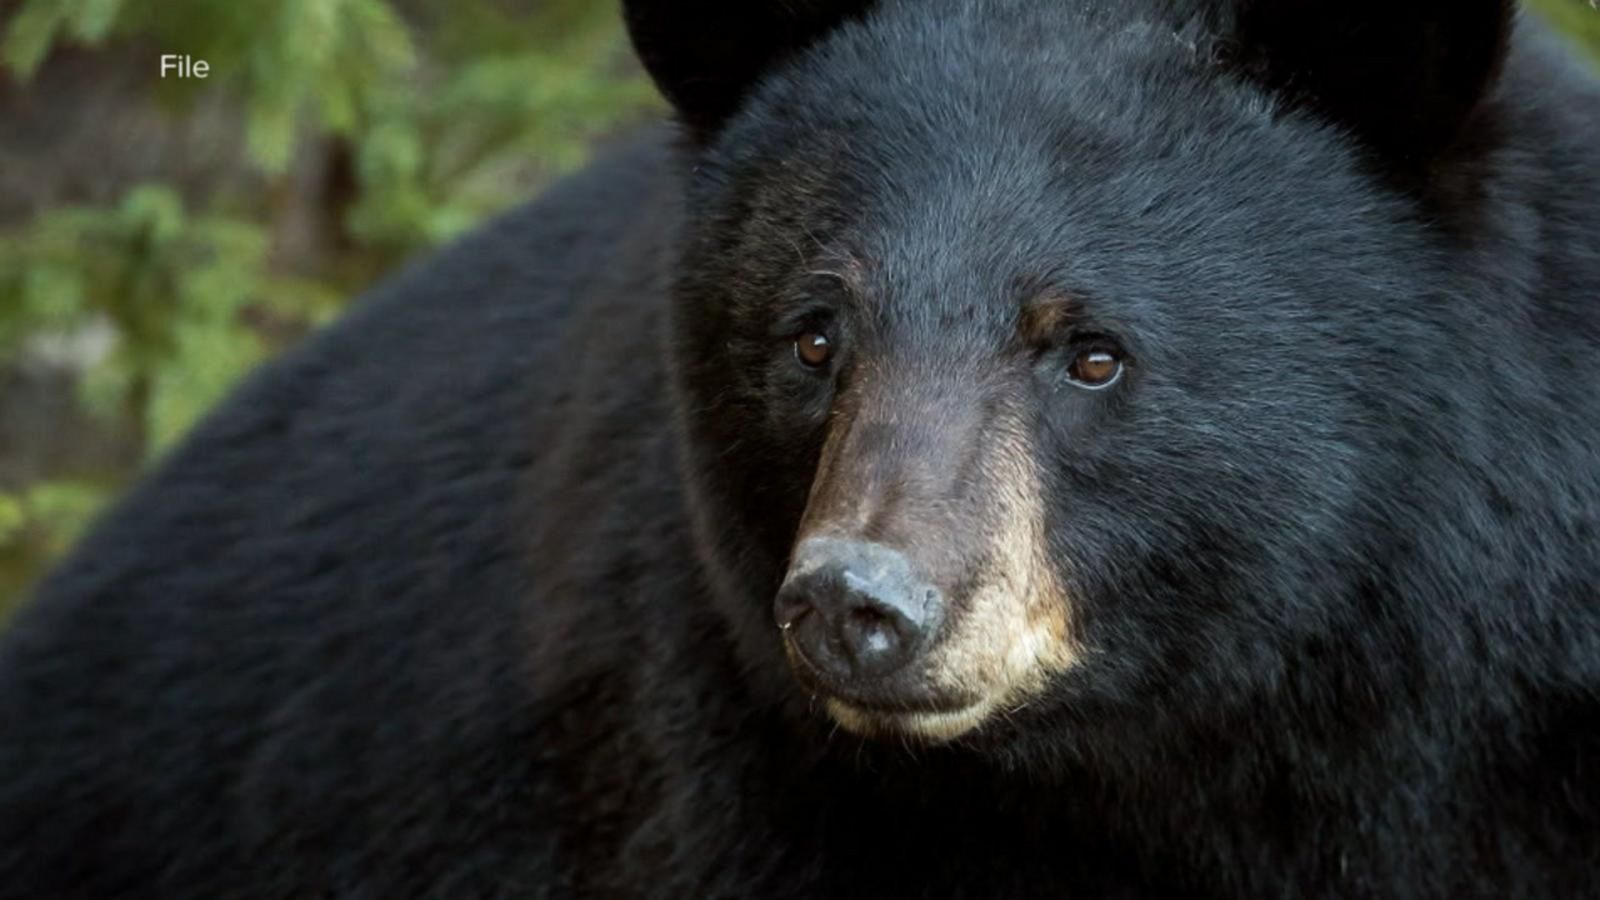 10-year-old mauled by bear in Connecticut backyard - Good Morning America